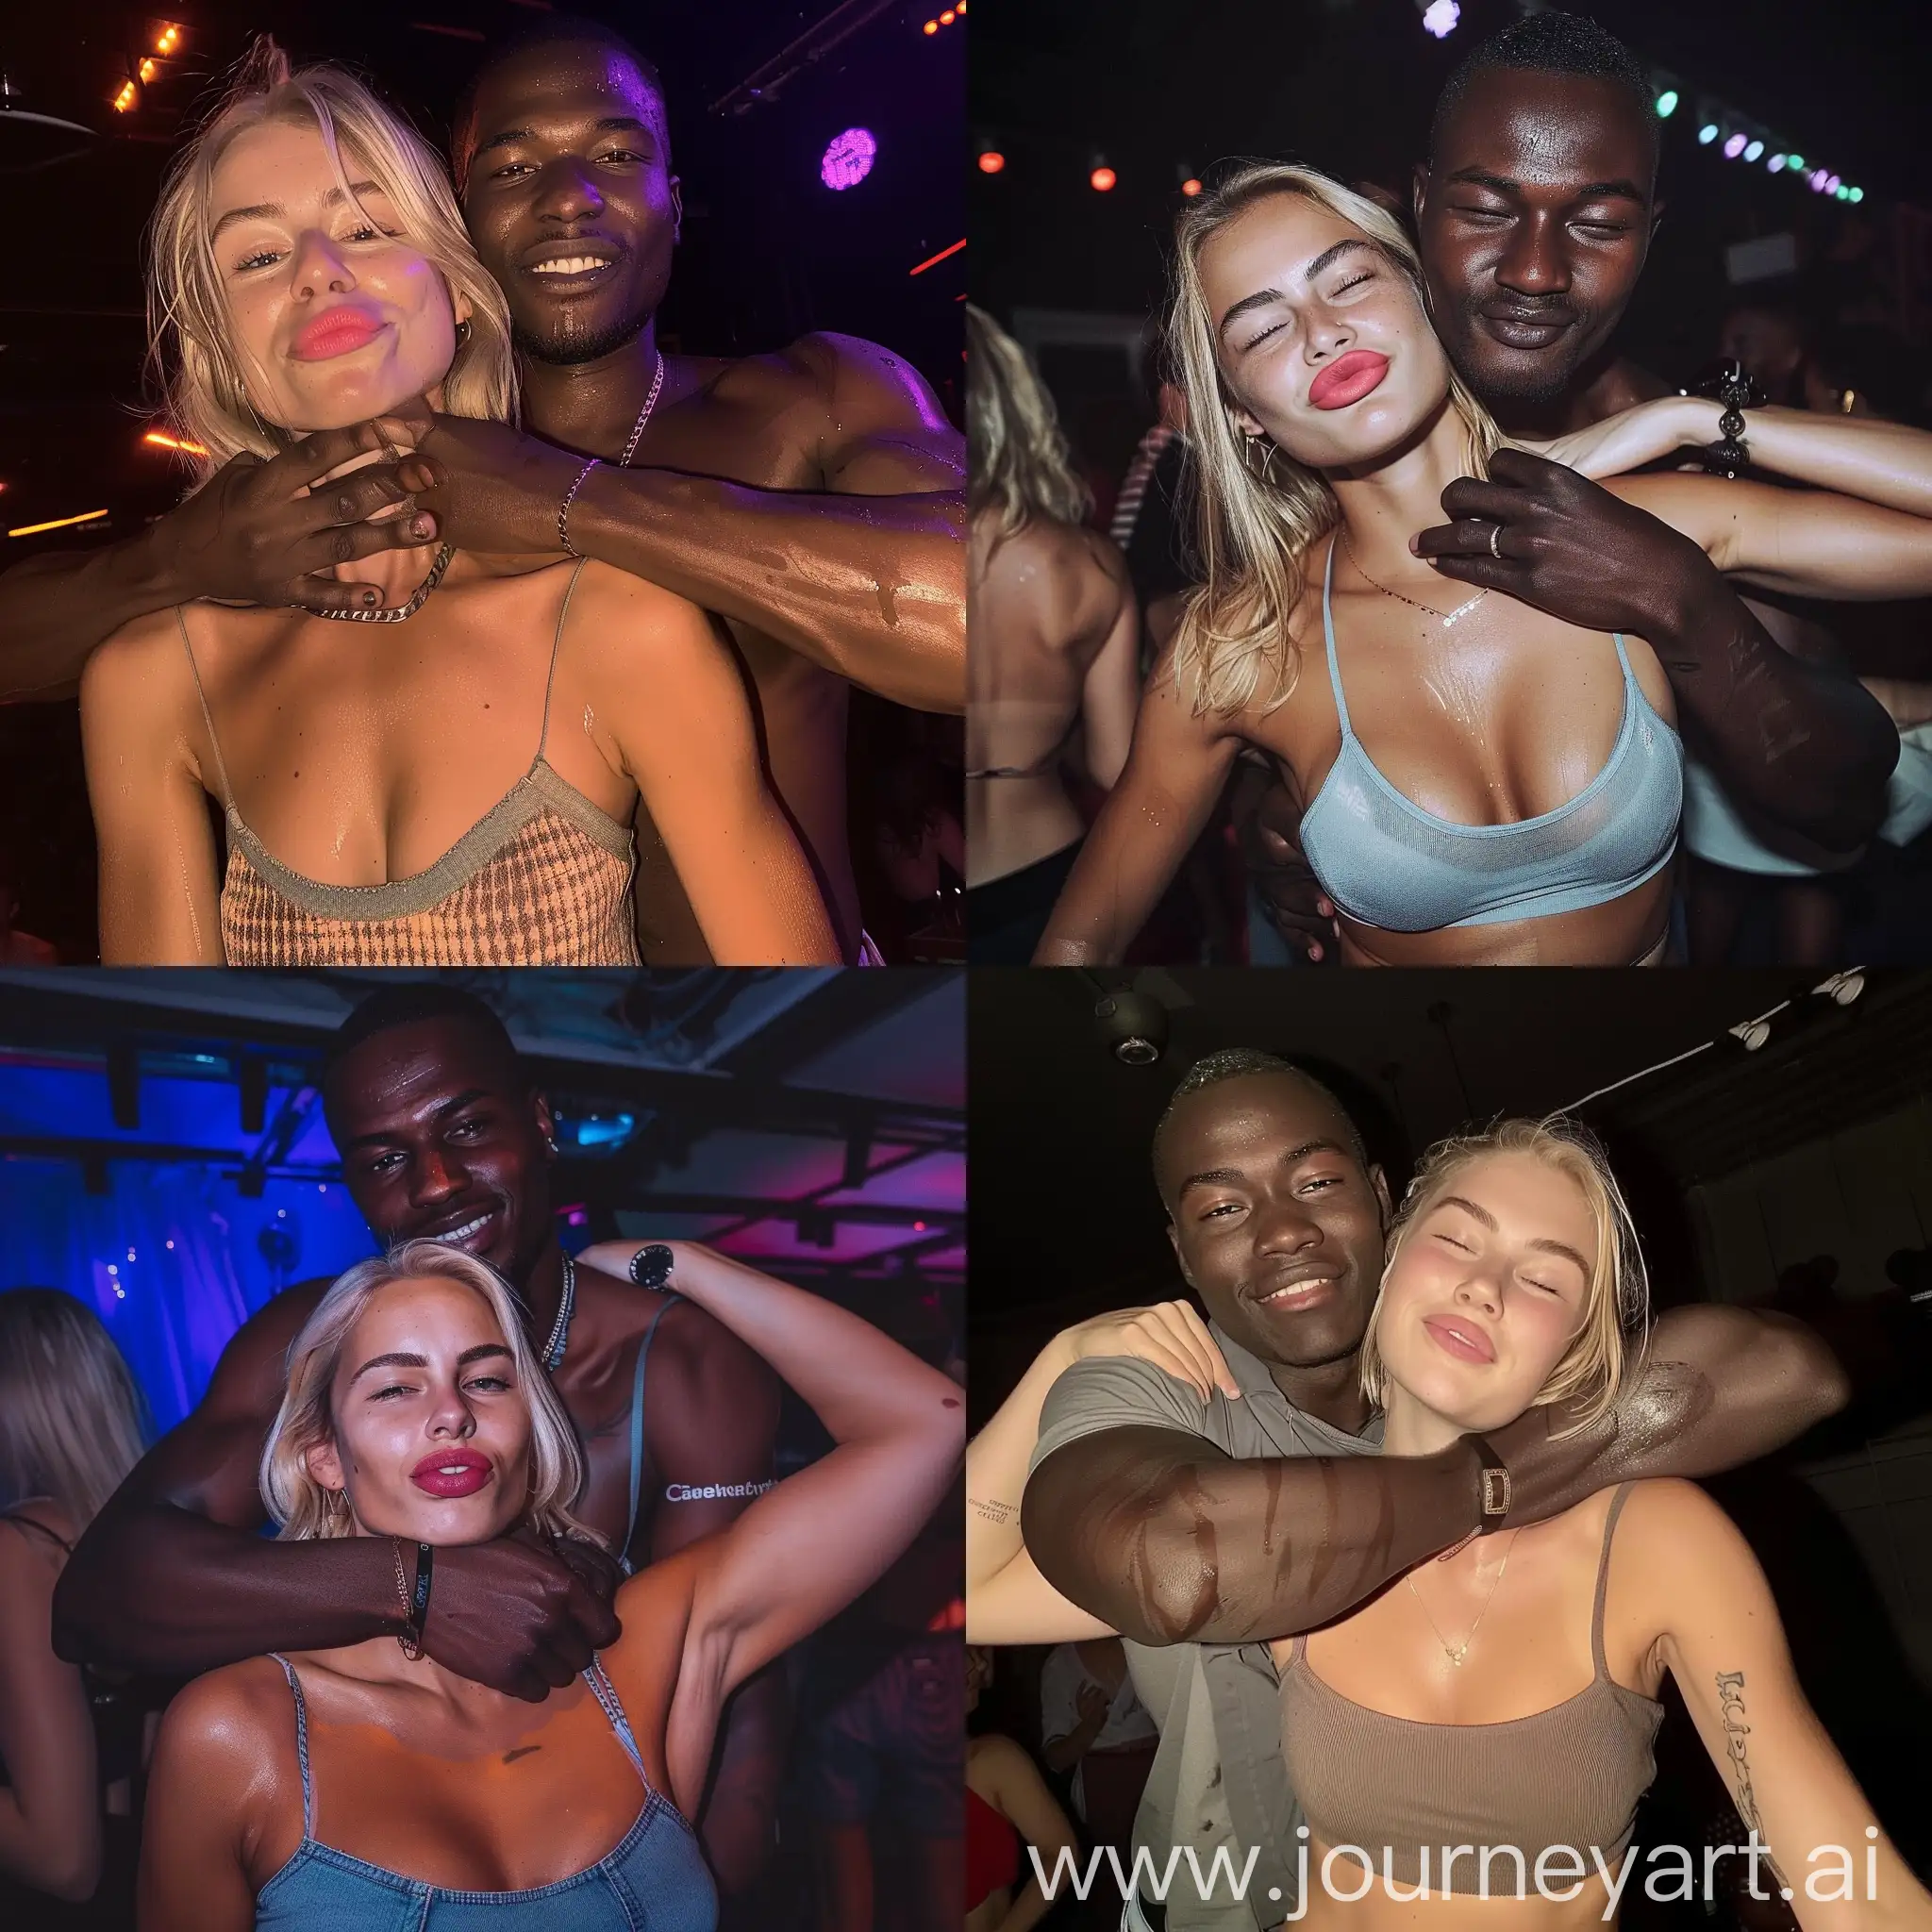 Aesthetic instagram selfie of a blonde danish woman in a party club crop-top getting hugged possessively by her tall robust african partner, she is doing the duck lips pose, her partner is grabbing her neck and smiling, the woman is beautiful and looks typically danish, both are looking at the camera, sweaty and flirty